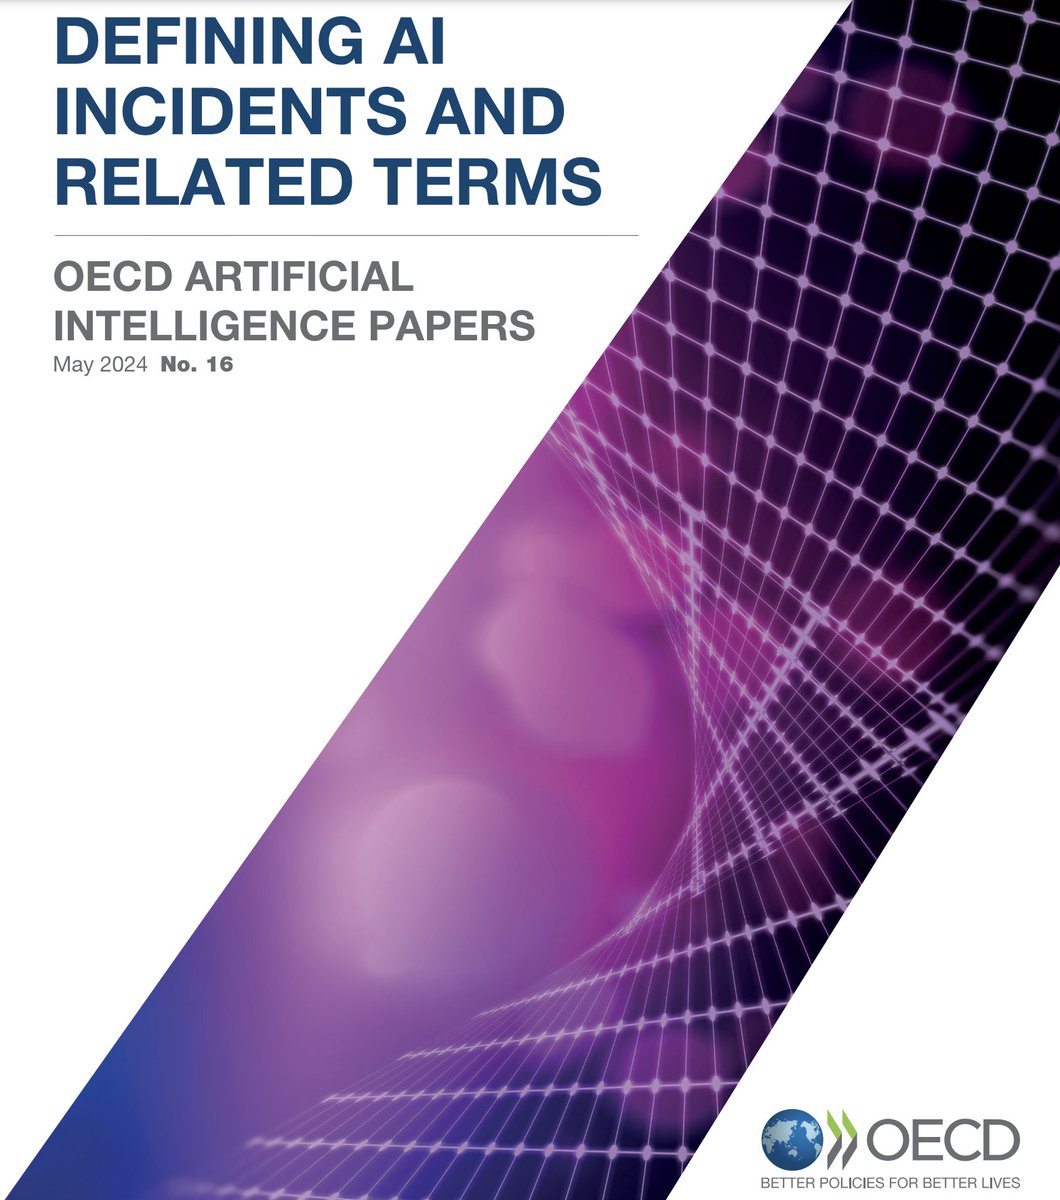 🚨 BREAKING: The OECD publishes a new AI report: 'Defining AI incidents and related terms,' and it's a must-read for everyone in AI. Important information: ➡ An AI incident is defined as: 'an event, circumstance or series of events where the development, use or malfunction of